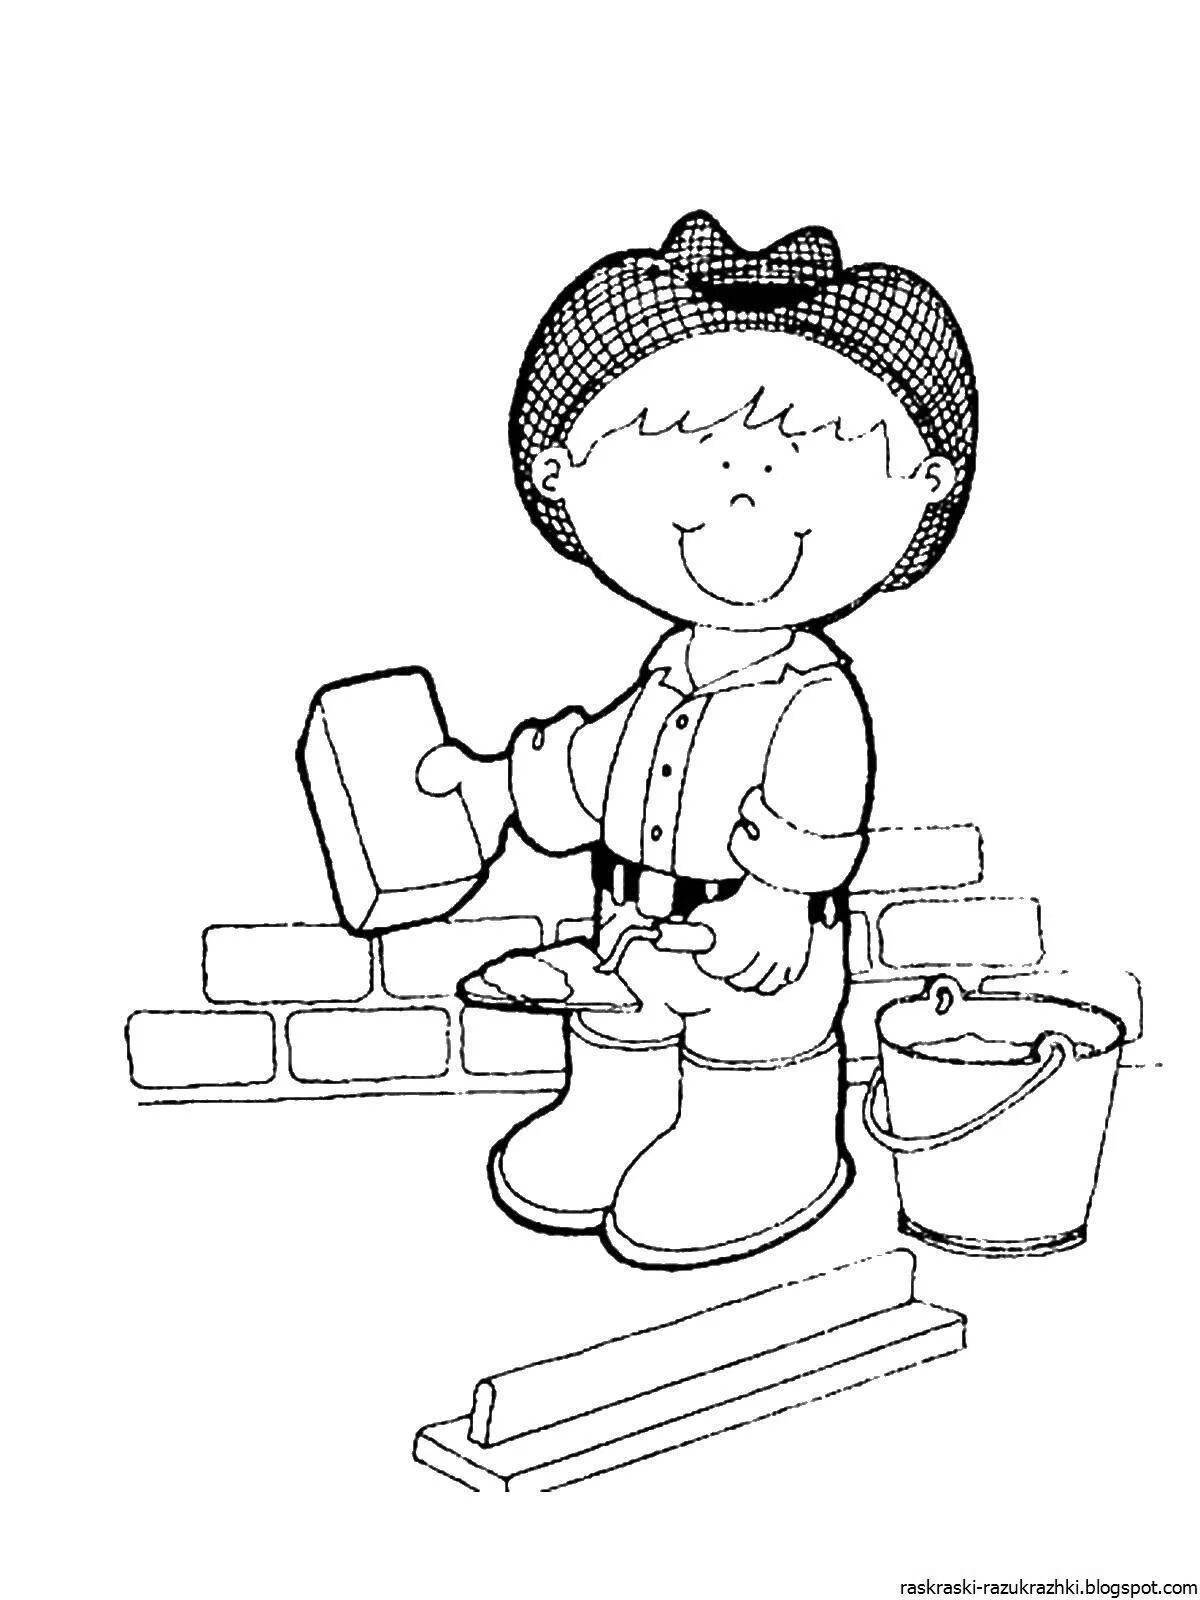 Colorful job coloring pages for babies